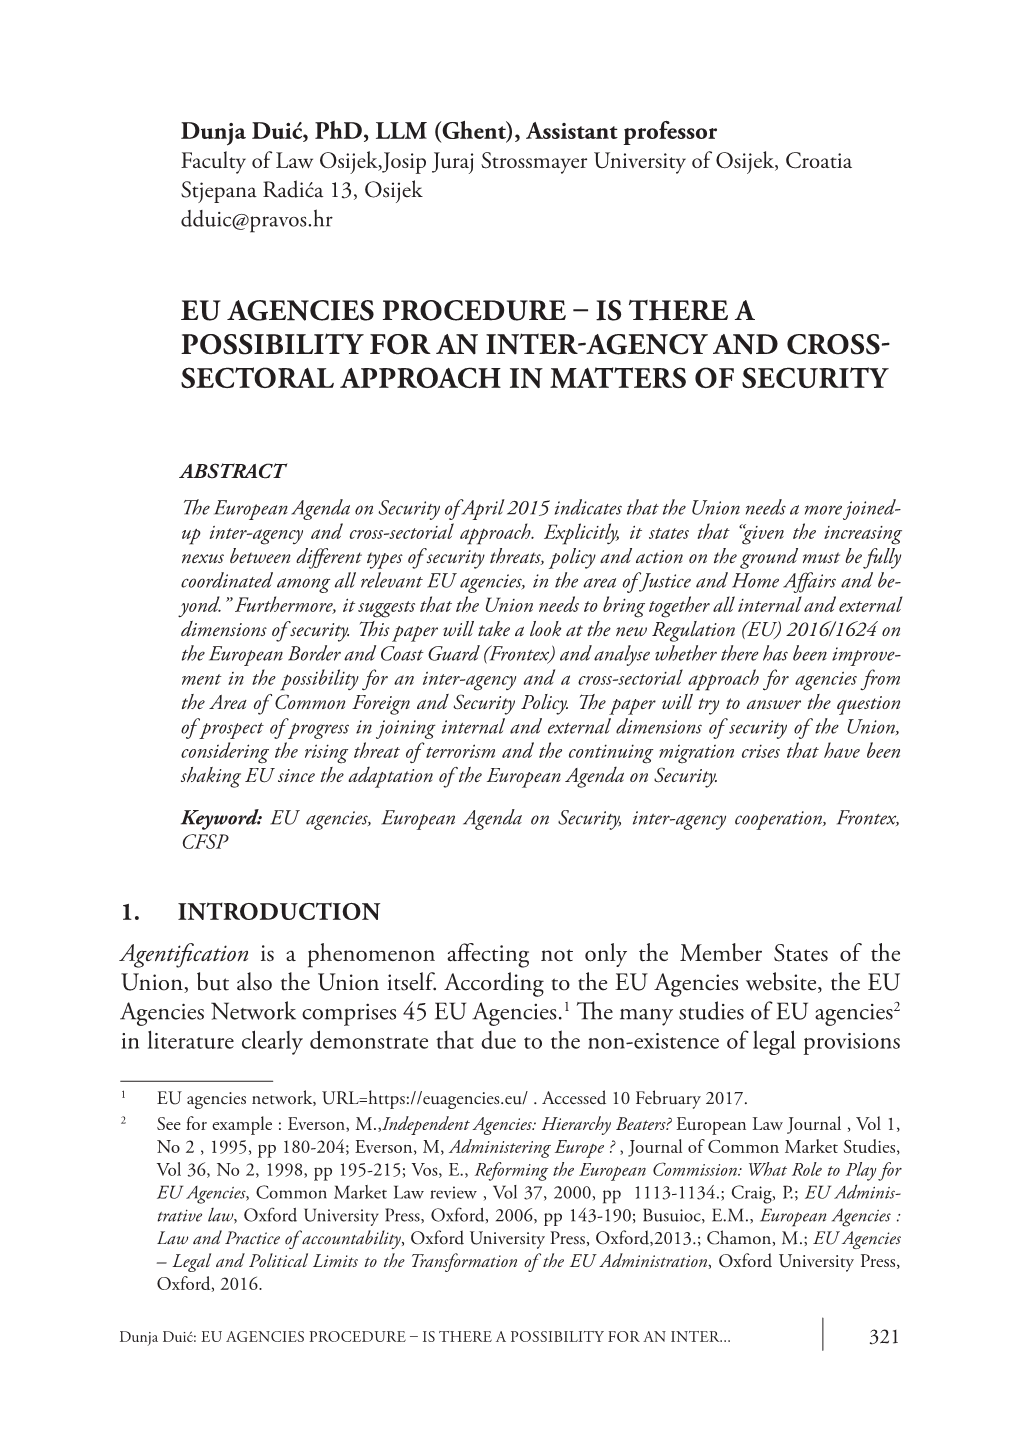 Is There a Possibility for an Inter-Agency and Cross- Sectoral Approach in Matters of Security